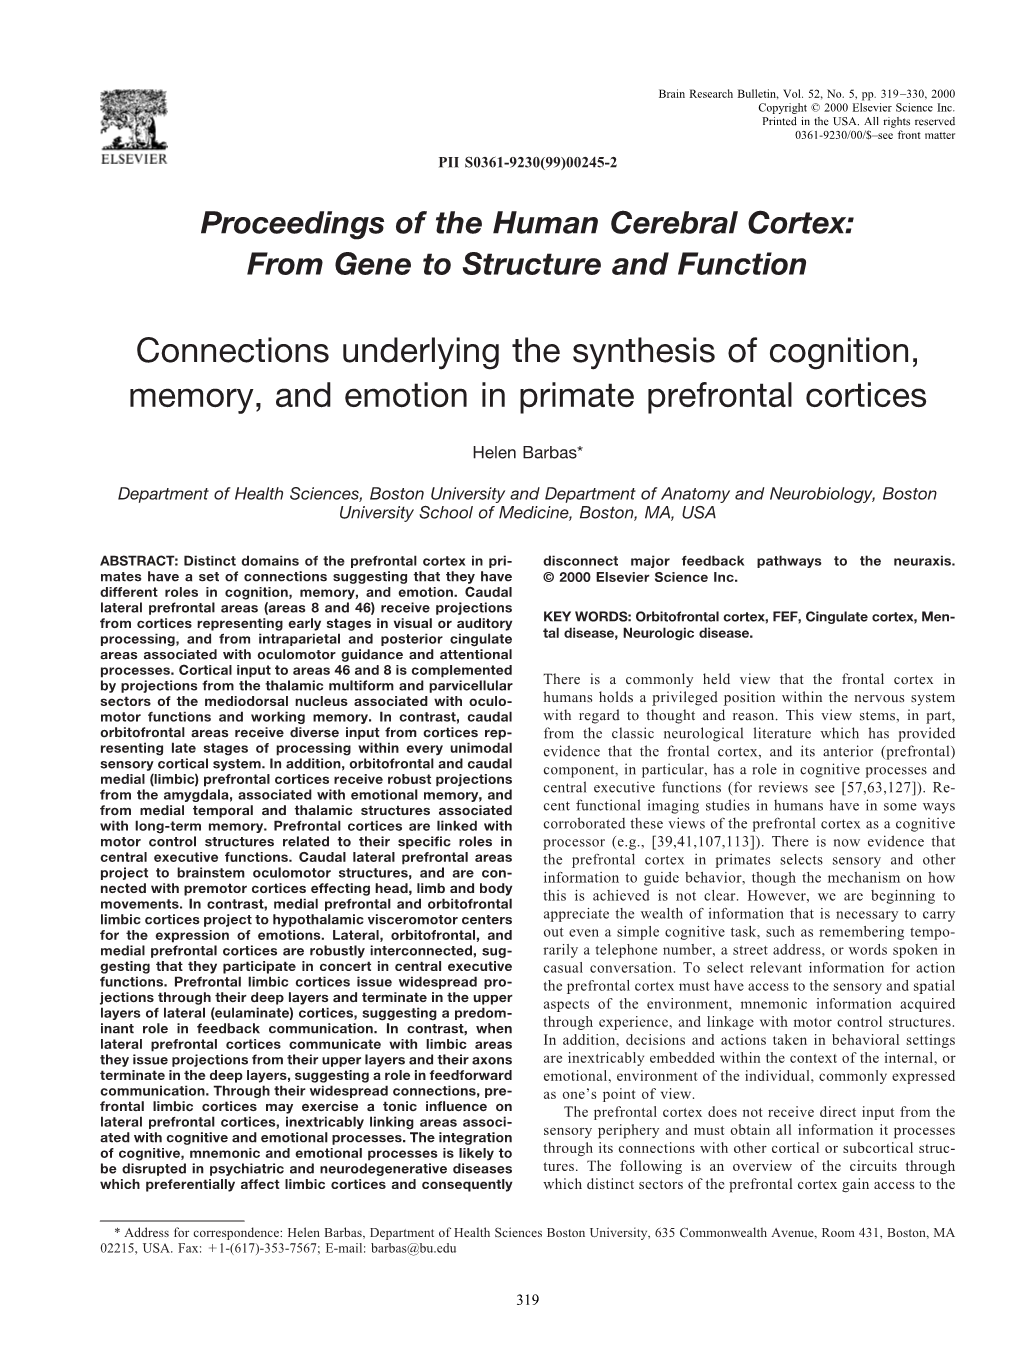 Connections Underlying the Synthesis of Cognition, Memory, and Emotion in Primate Prefrontal Cortices